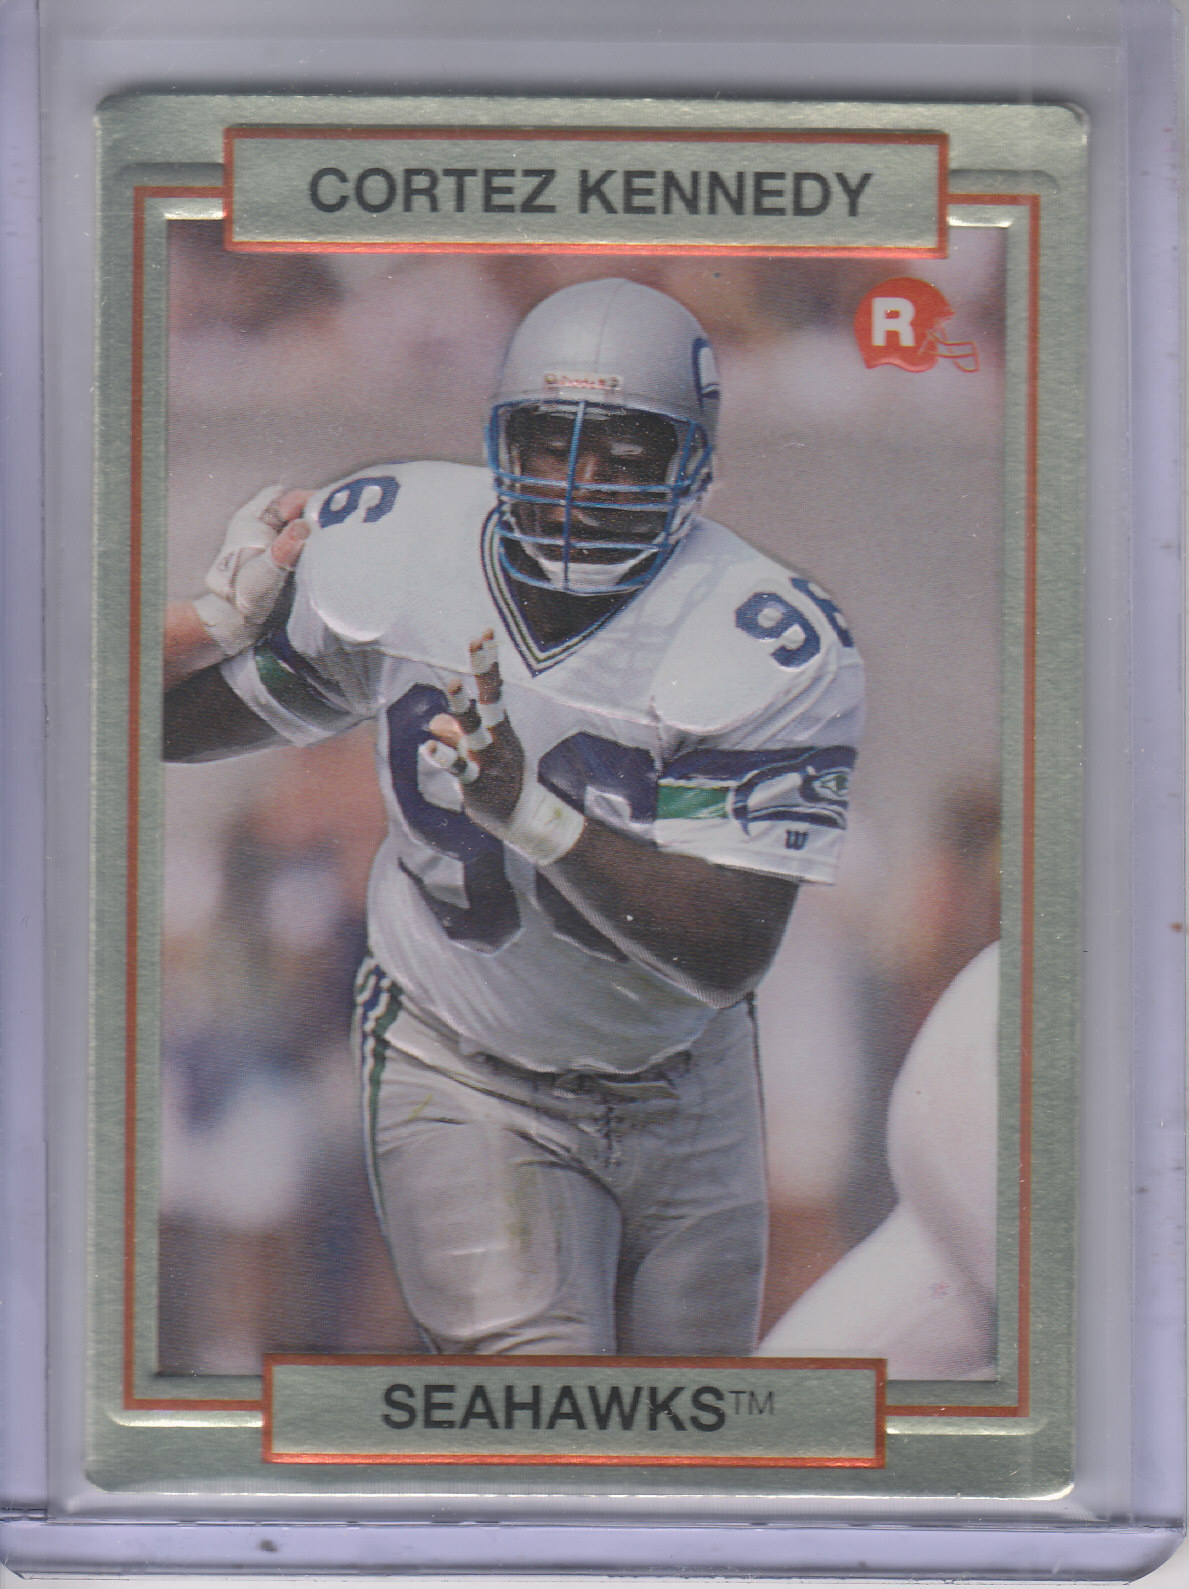 1990 Action Packed Rookie Update #39 Cortez Kennedy RC